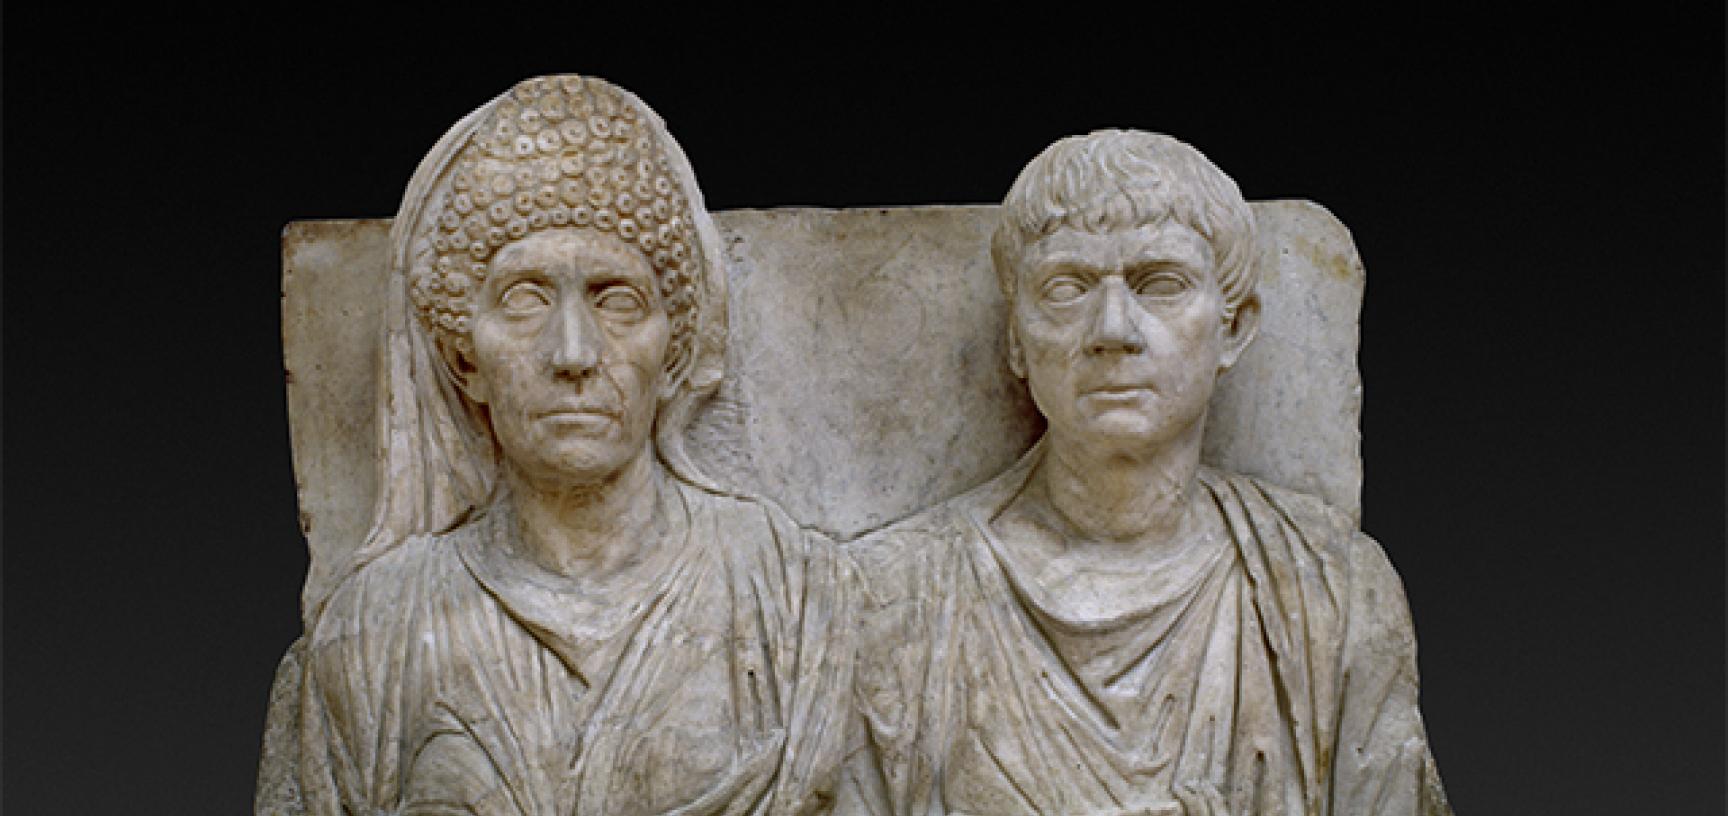 TOMBSTONE OF CLAUDIUS AGATHEMERUS AND MYRTALE ROME at the Ashmolean